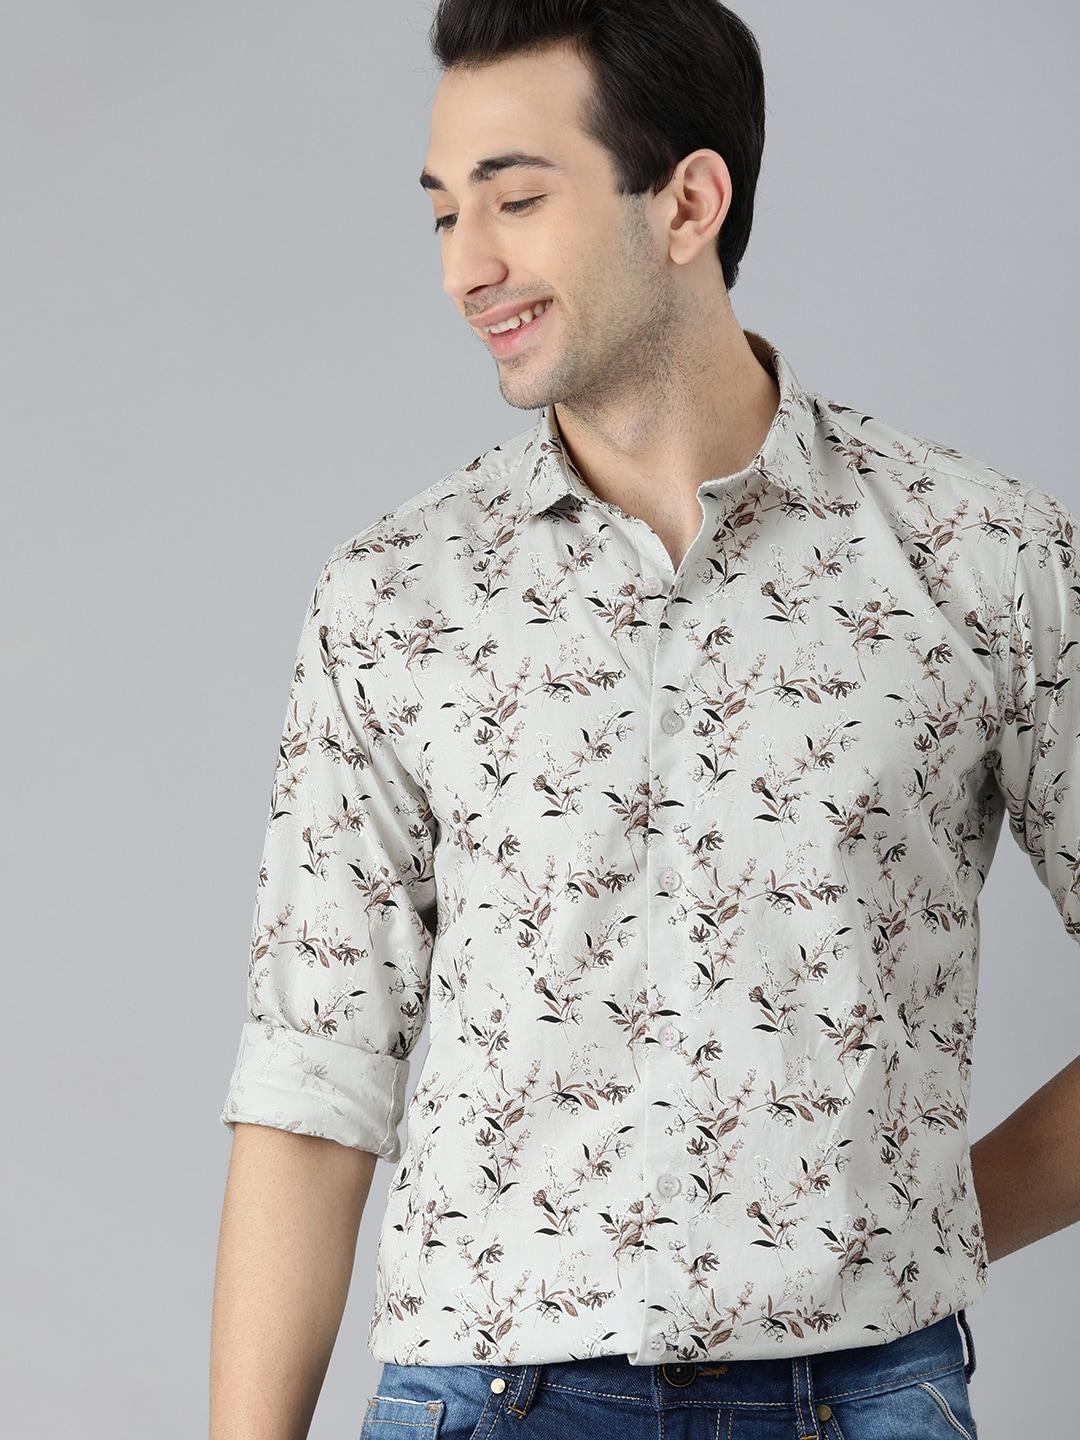 mast-&-harbour-men-green-slim-fit-floral-printed-casual-sustainable-shirt